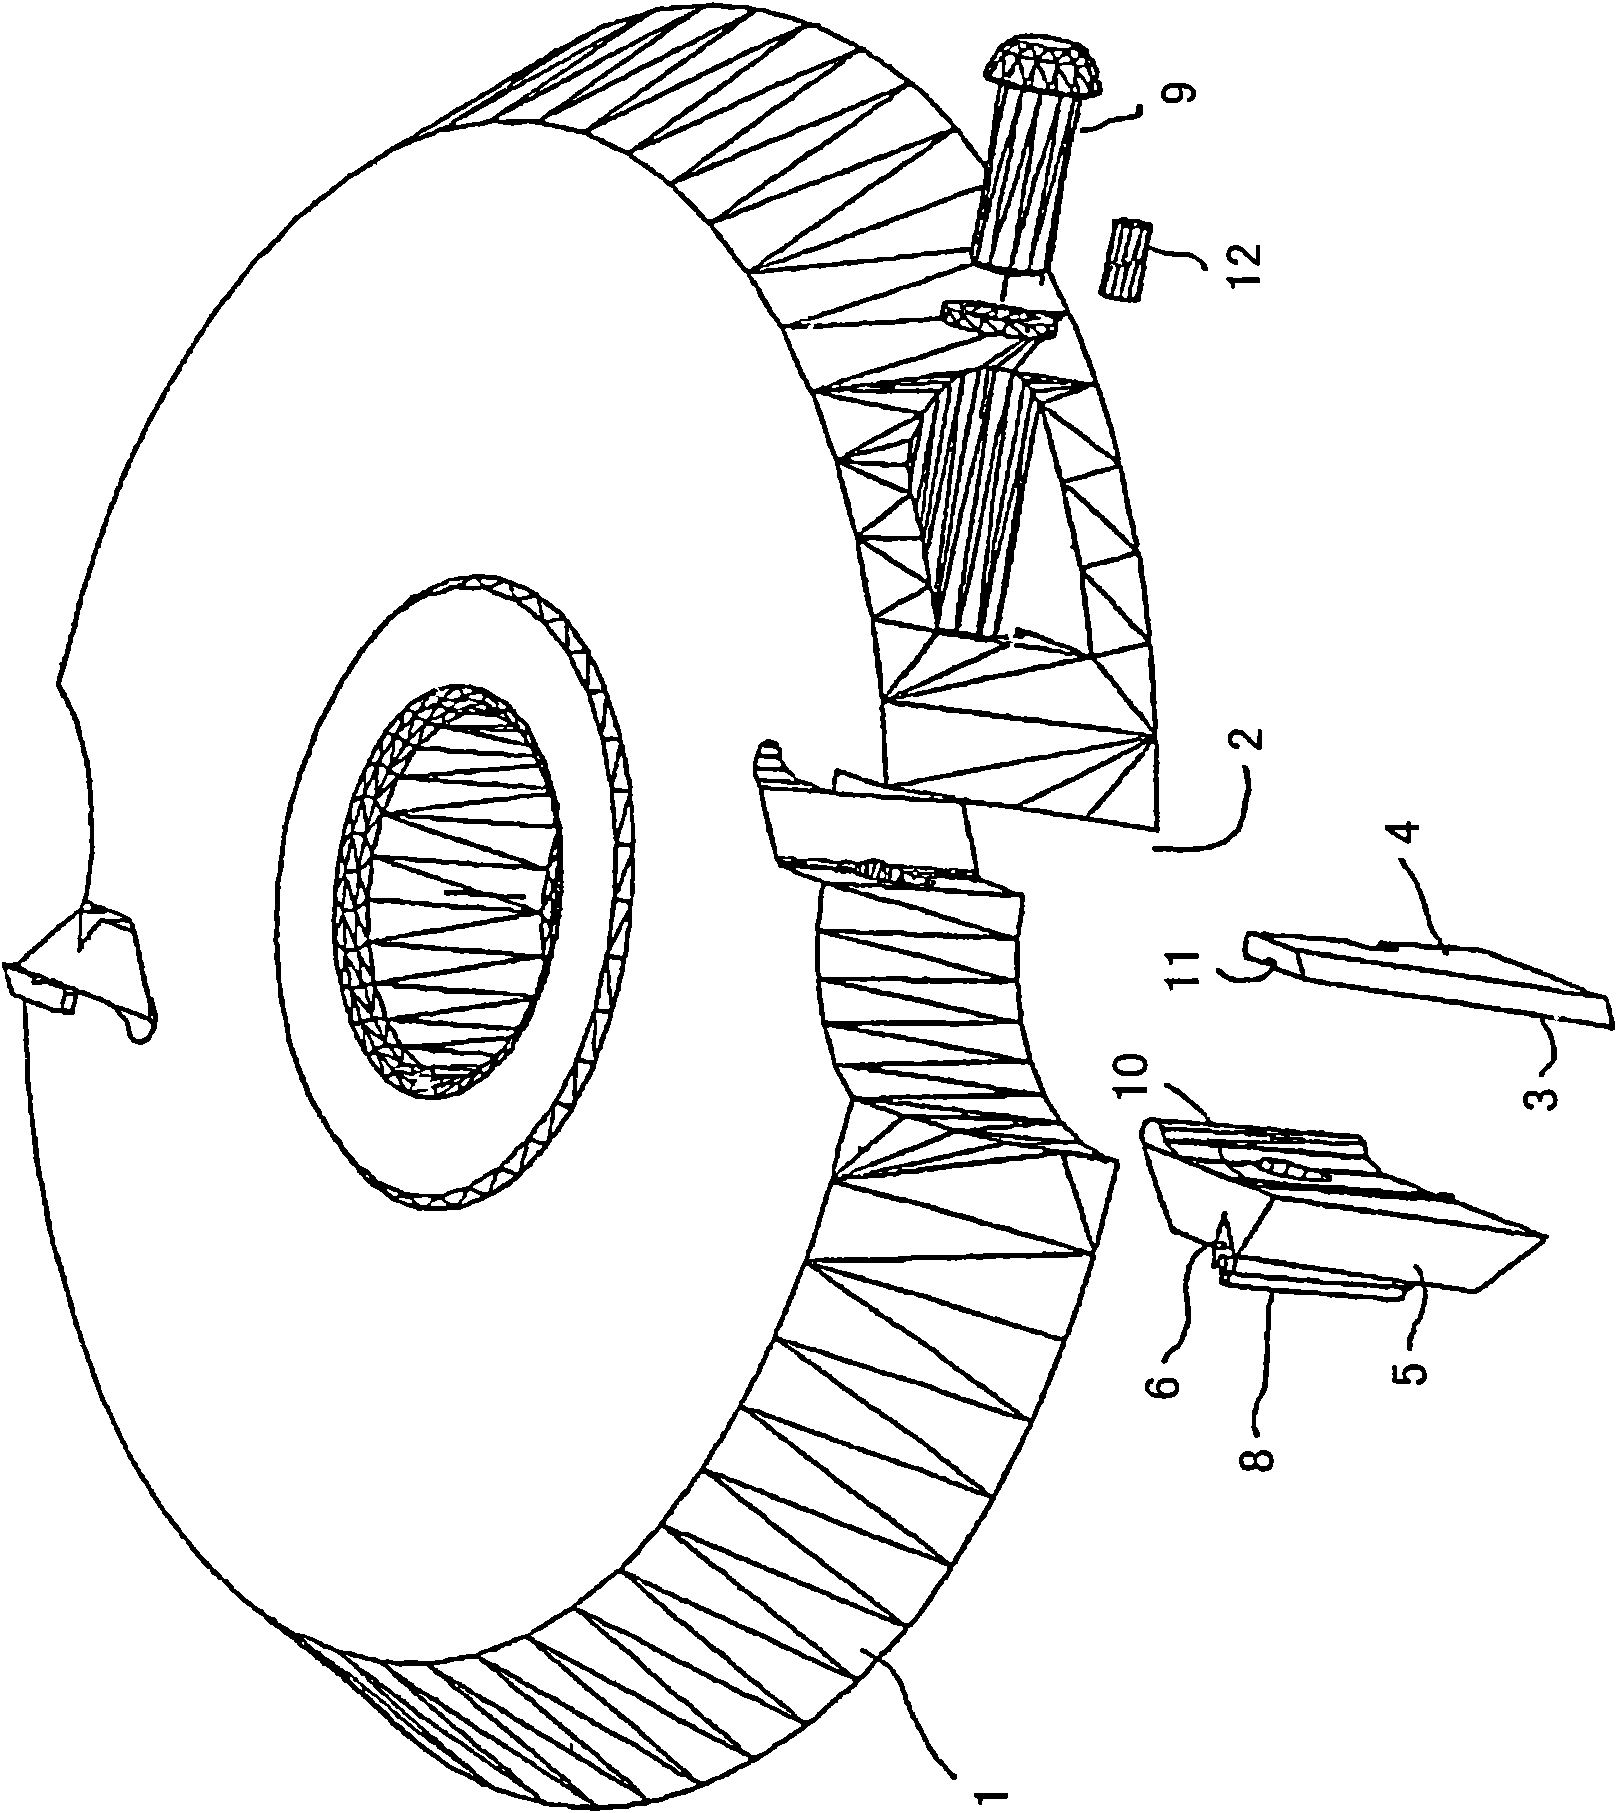 Cutting tool with a supporting body